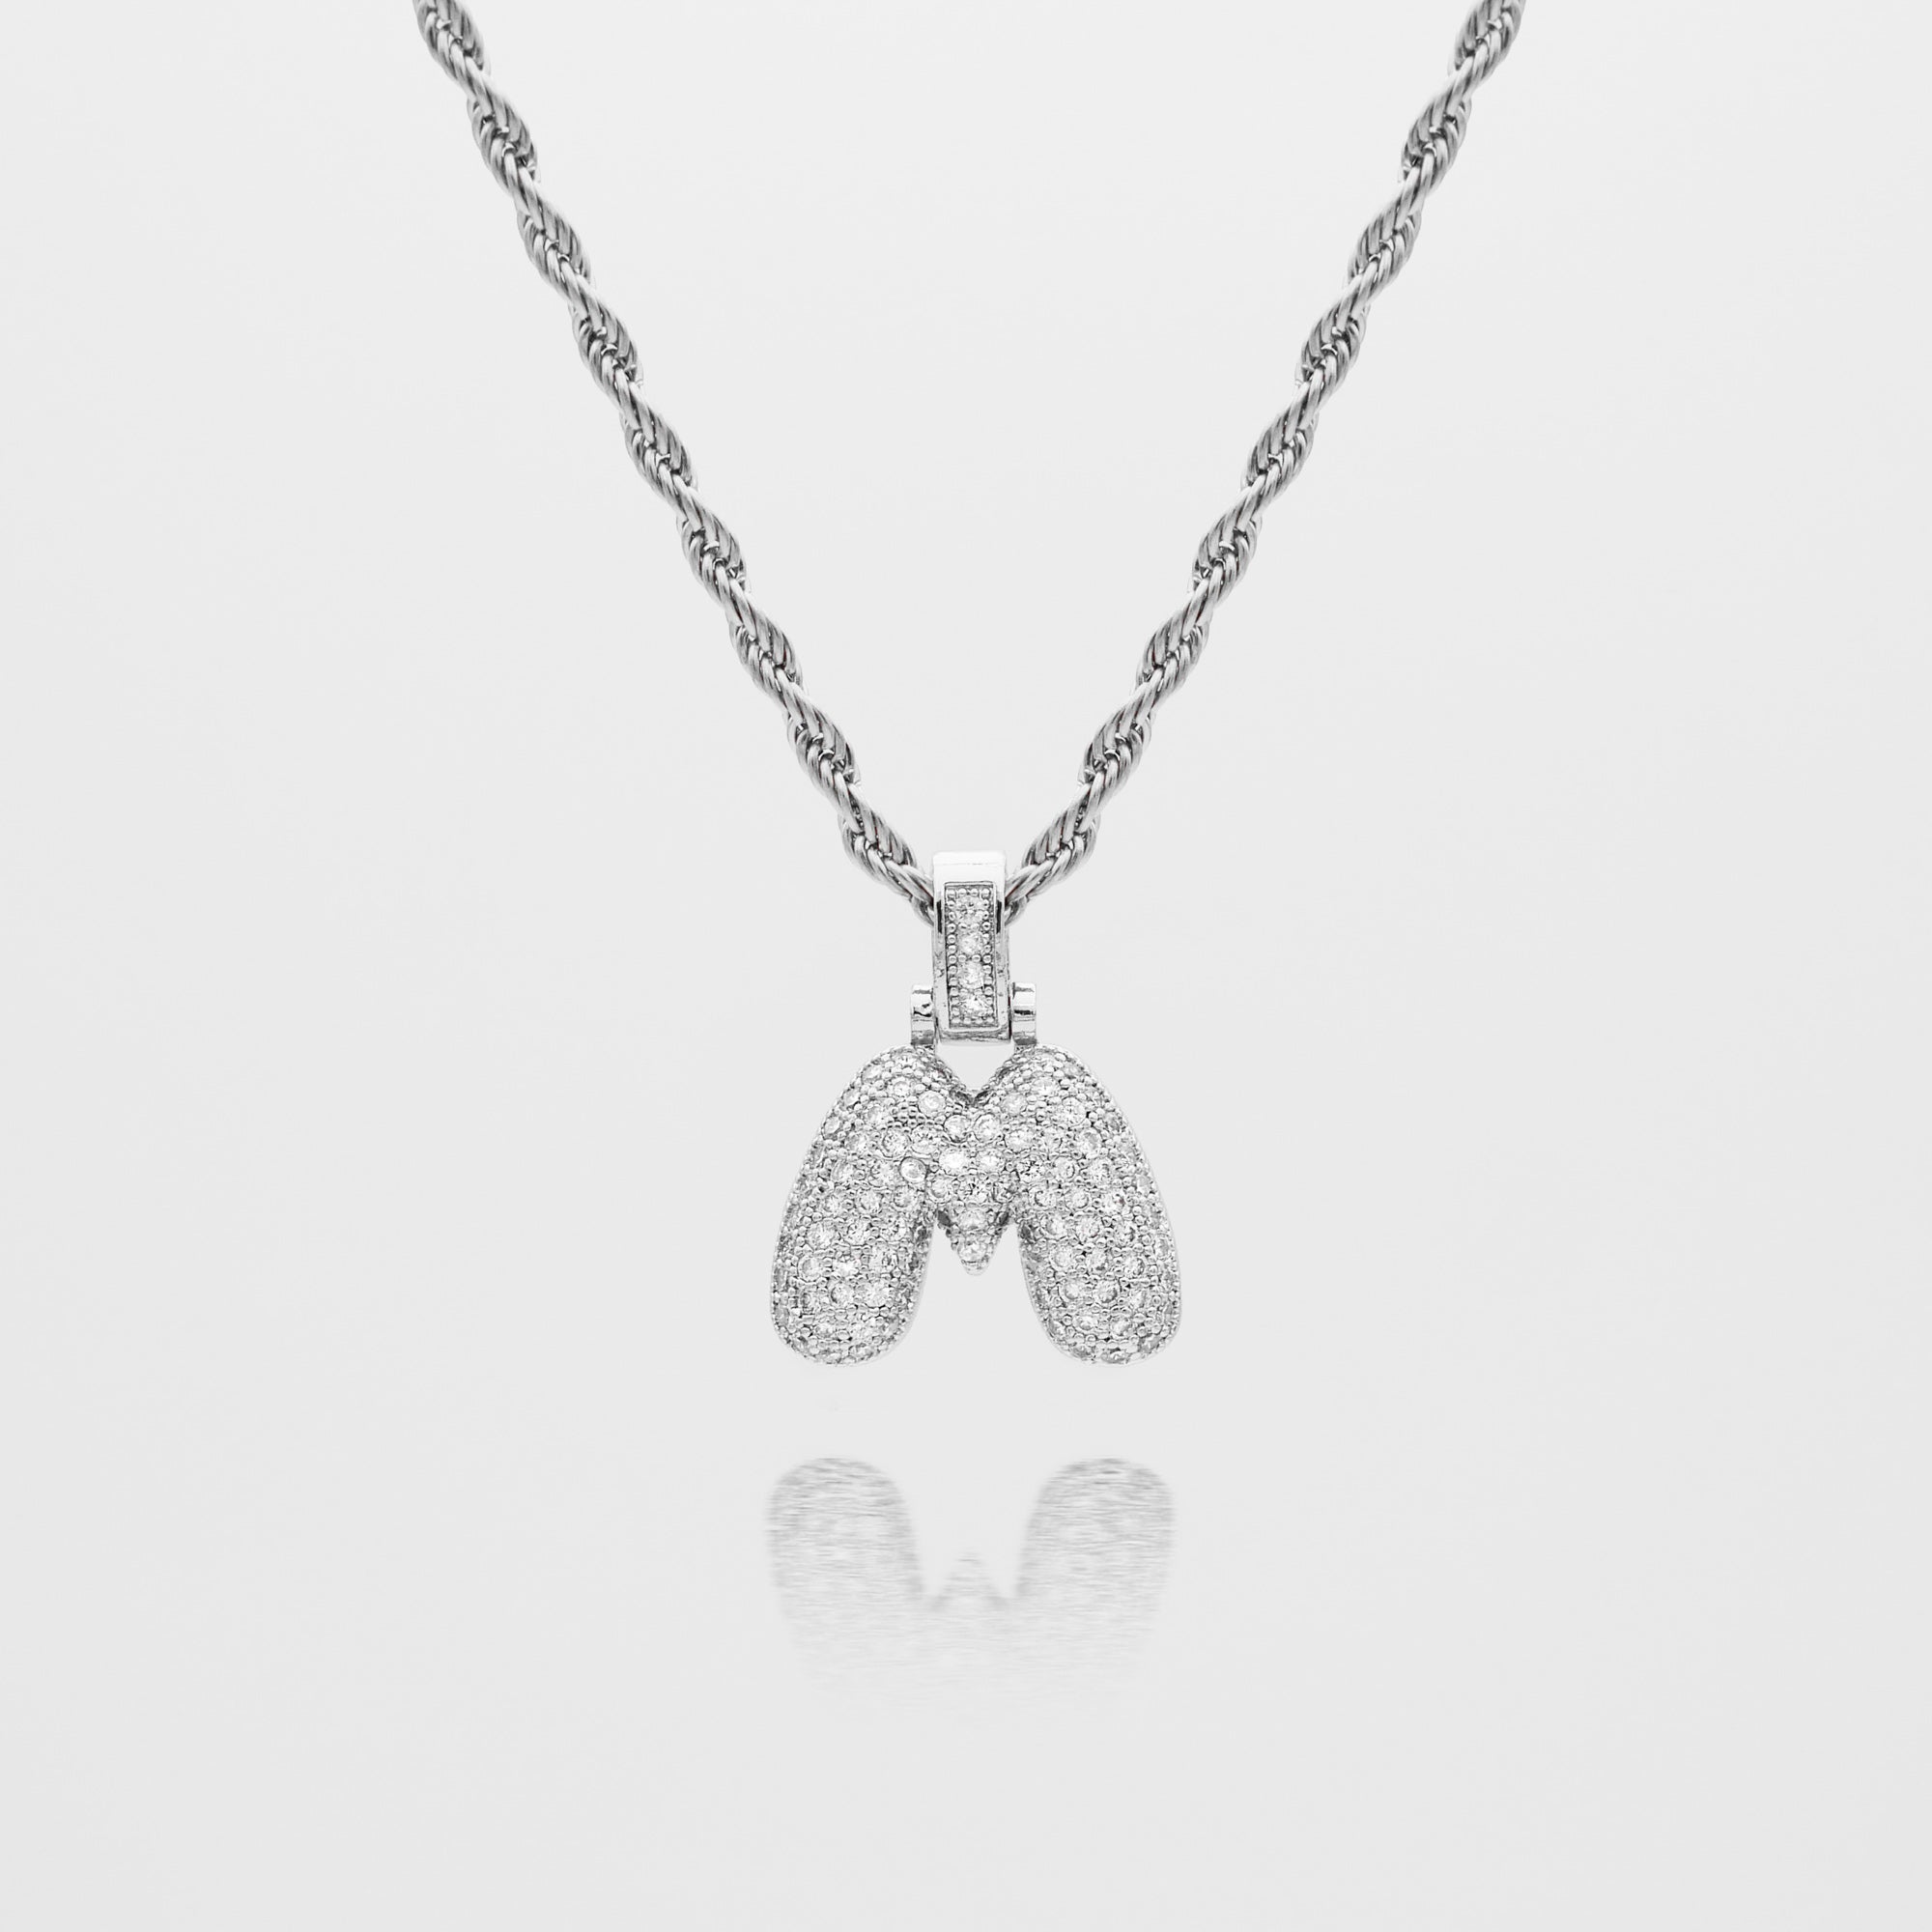 Pave Bubble Letter Initial Necklace encrusted with radiant CZ stones in silver rope chain